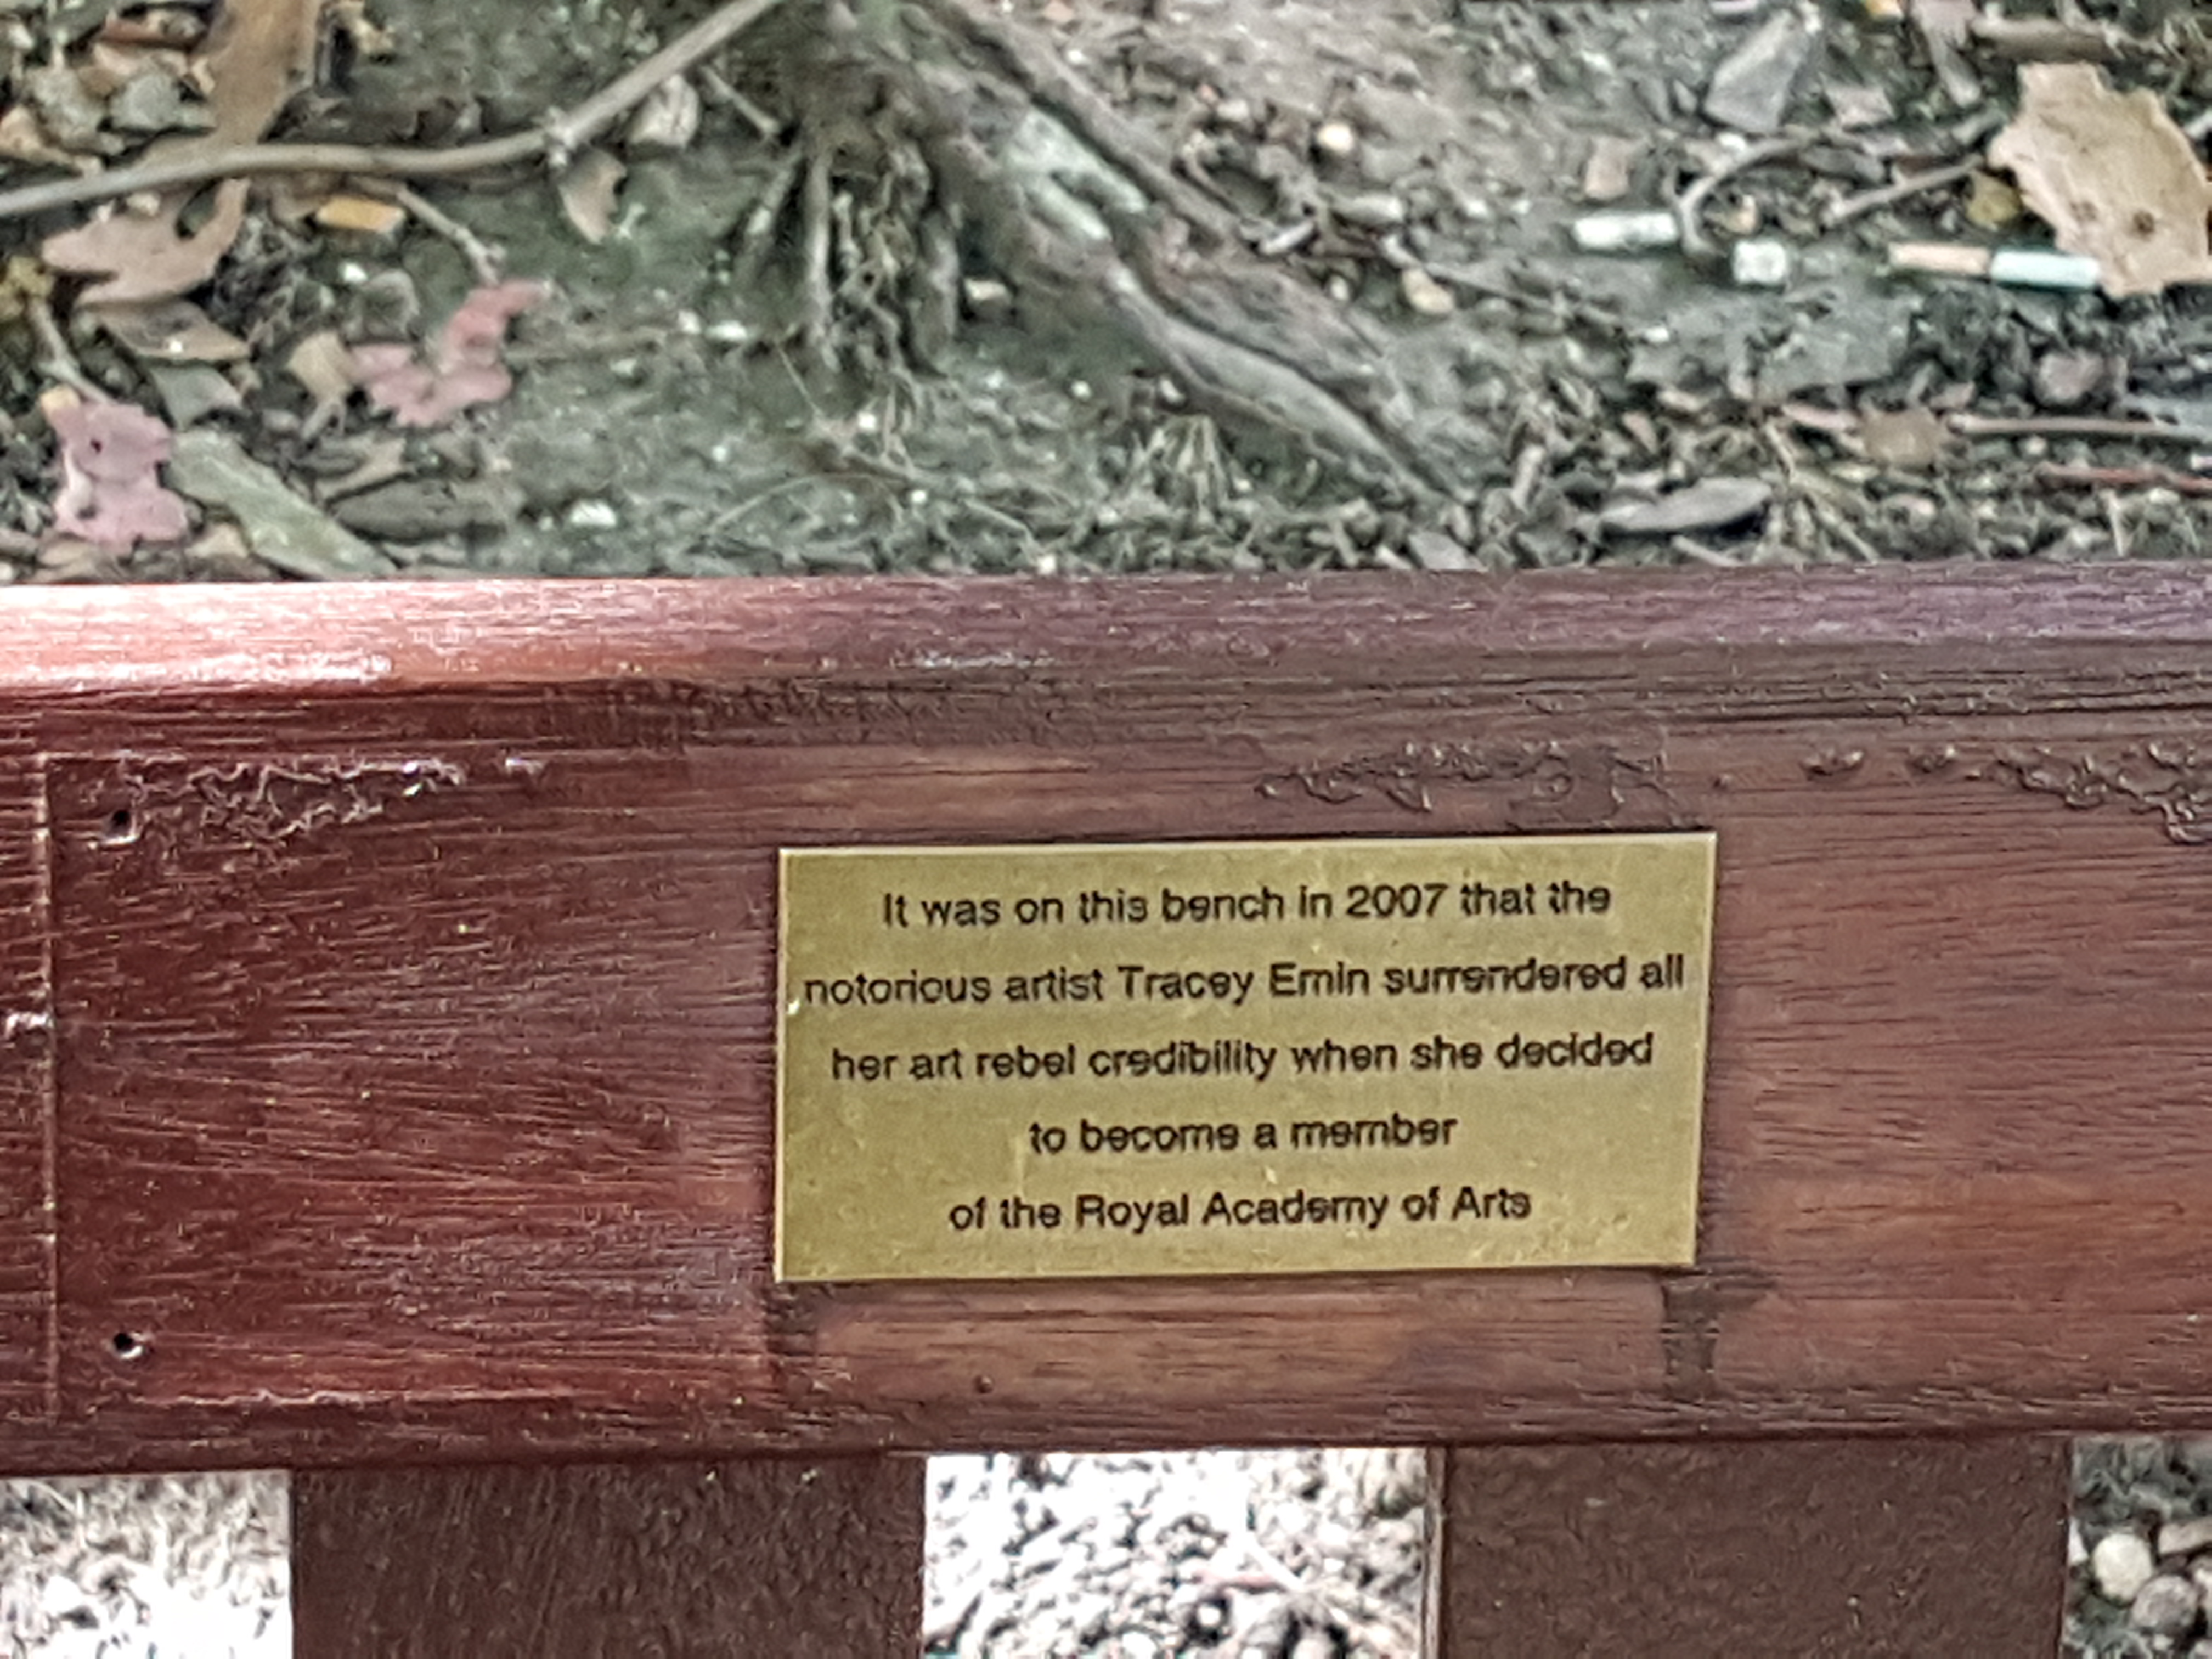 It was on this bench in 2007 that the notorious artist Tracey Emin surrendered all her art rebel credibility when she decided to become a member of the Royal Academy of Arts